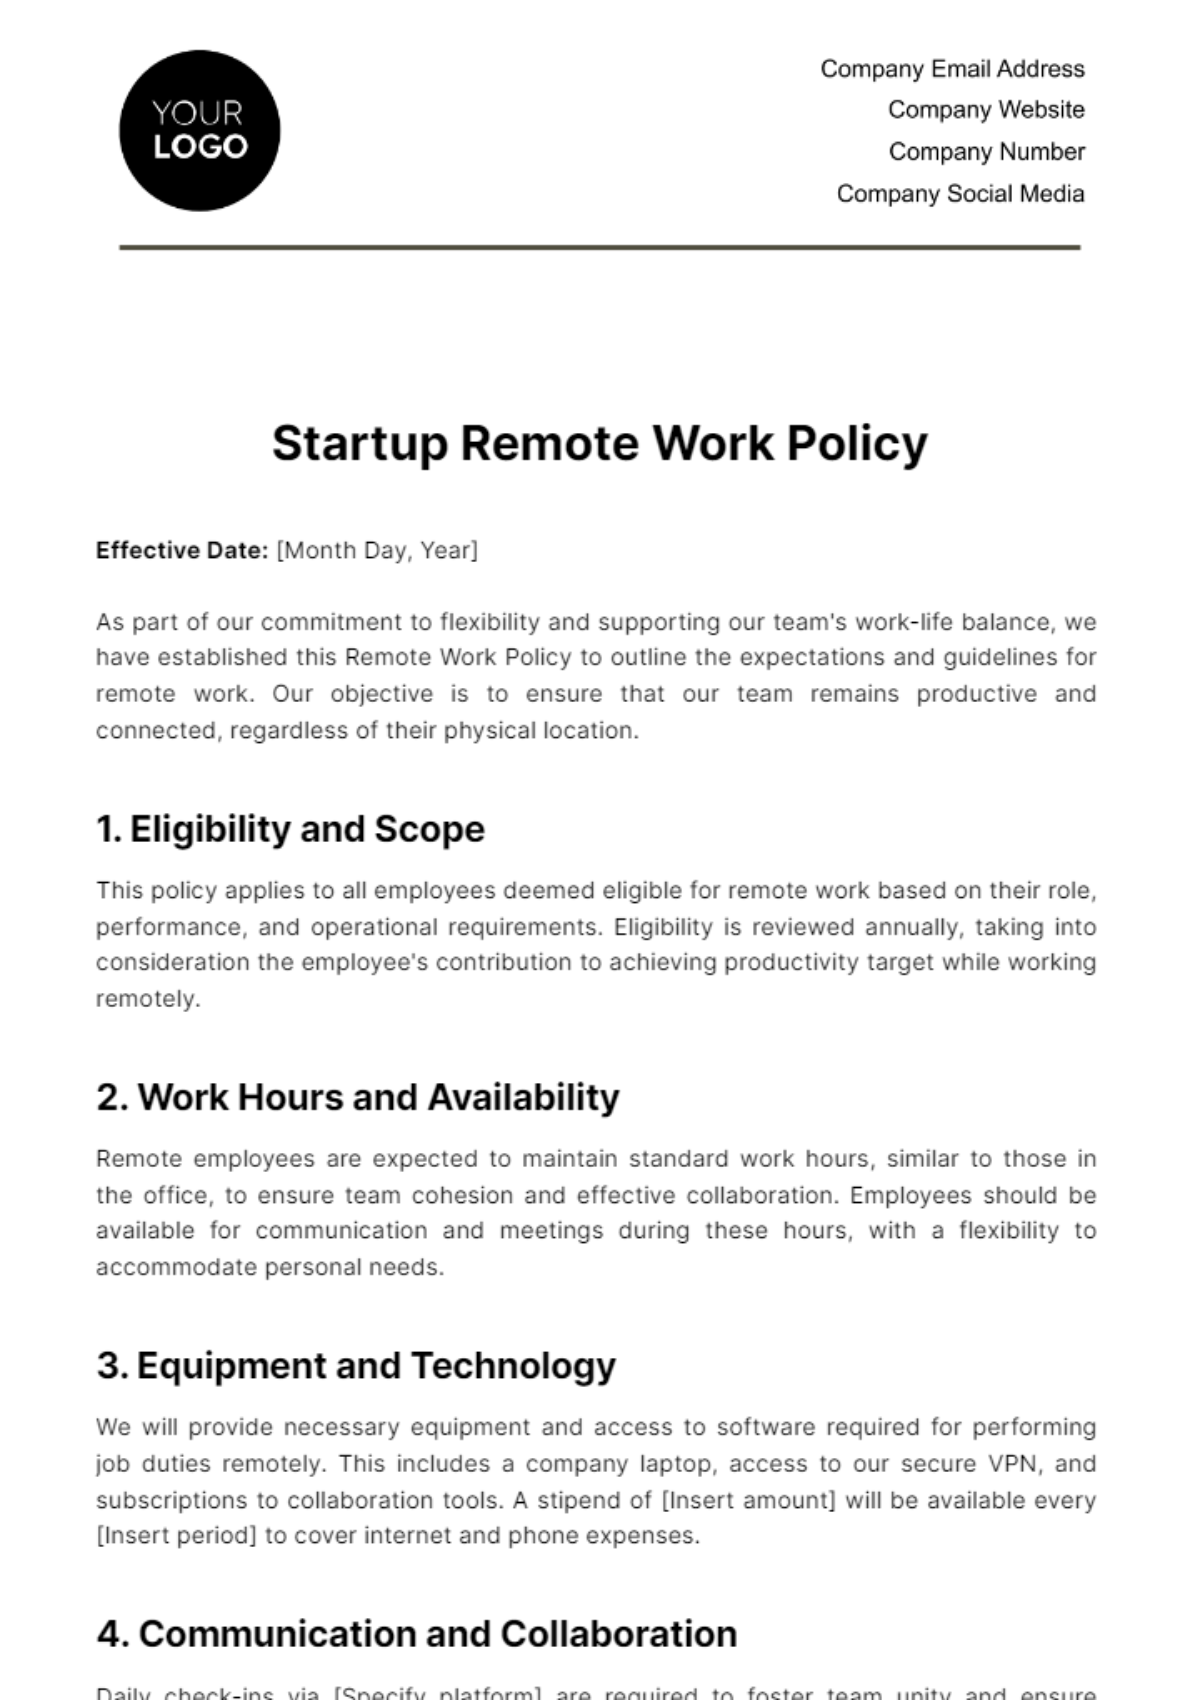 Startup Remote Work Policy Template